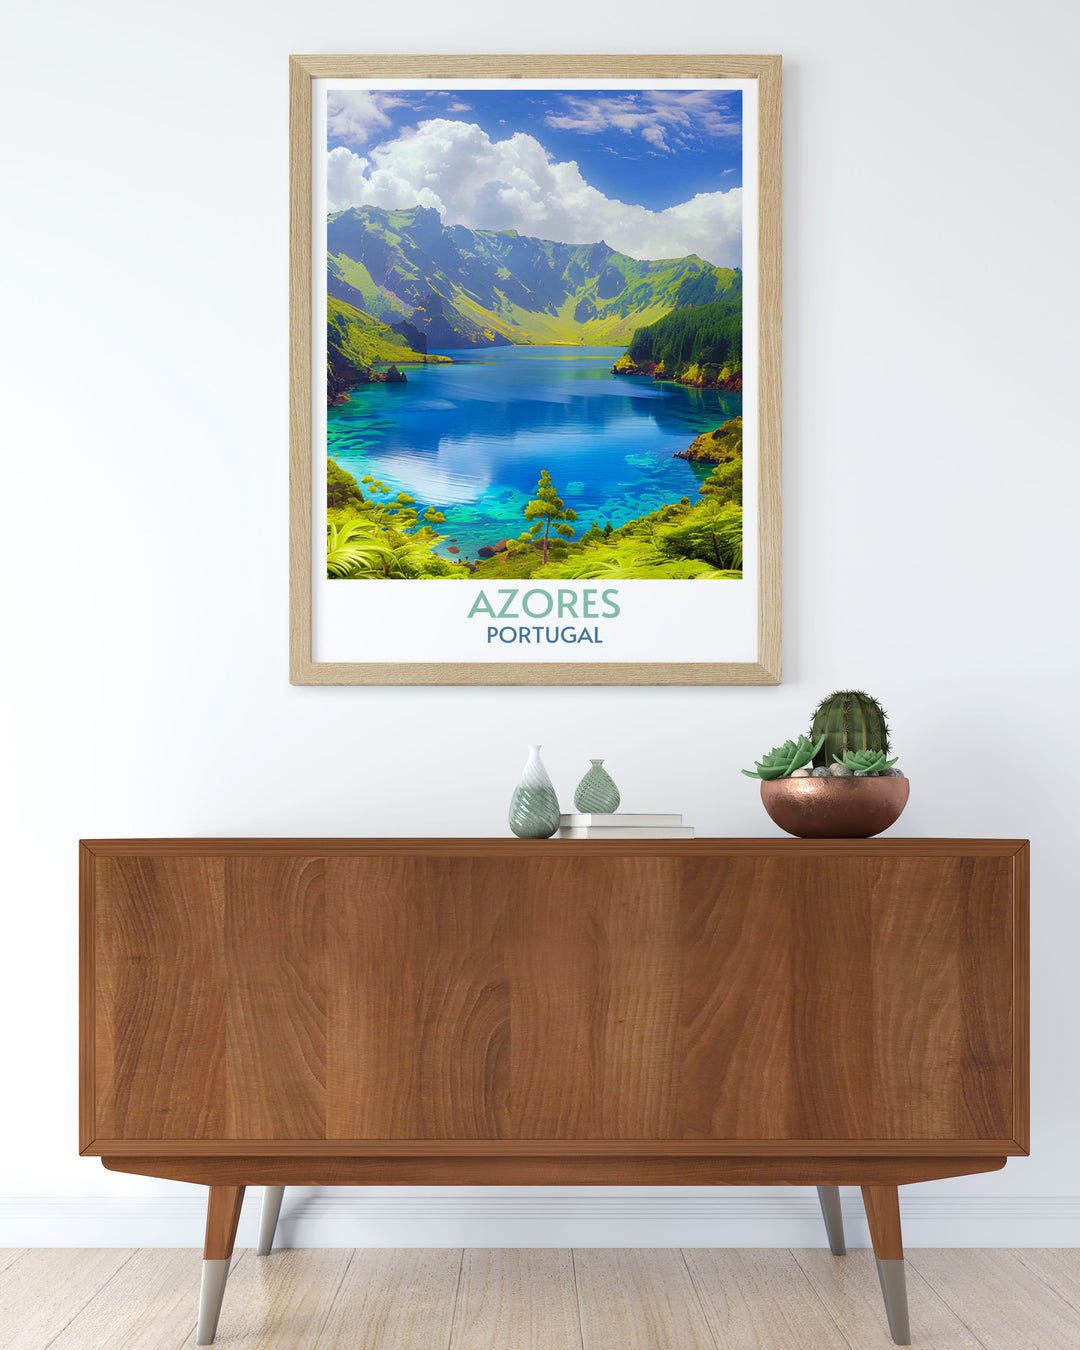 Azores travel print with a street map of Lagoa do Fogo, intricately detailed, offering a unique perspective of the region.